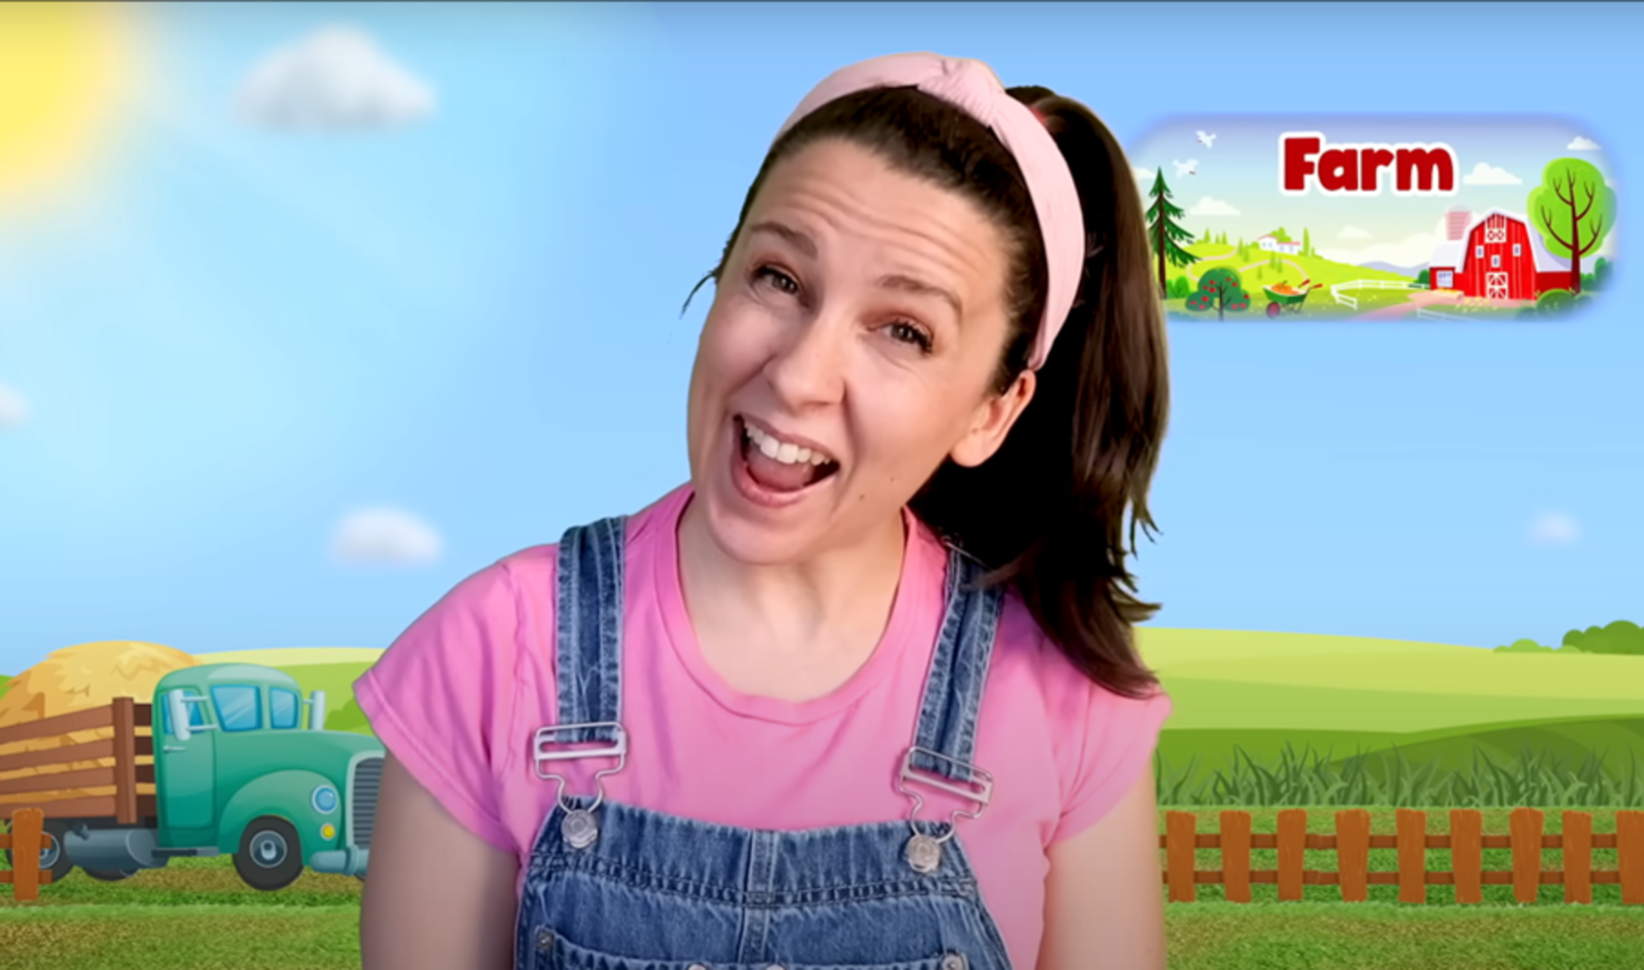 YouTube and TikTok presenter Ms Rachel smiles into the camera and in the background is an illustration of green fields, a tractor and a farm.